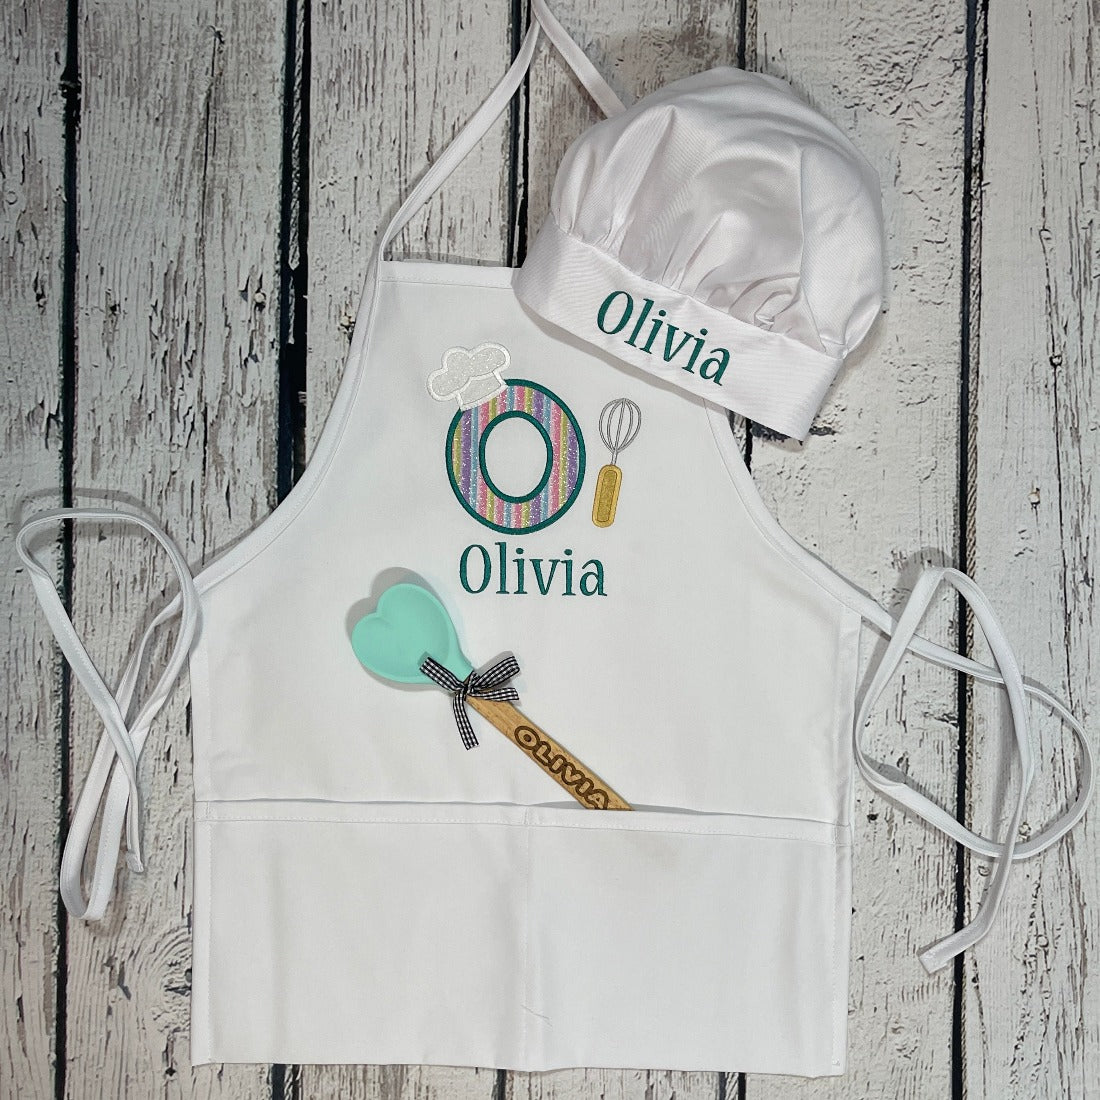 Girls Personalized Embroidered 3 piece set- apron, chef hat and engraved spatula. Matching name on all 3.